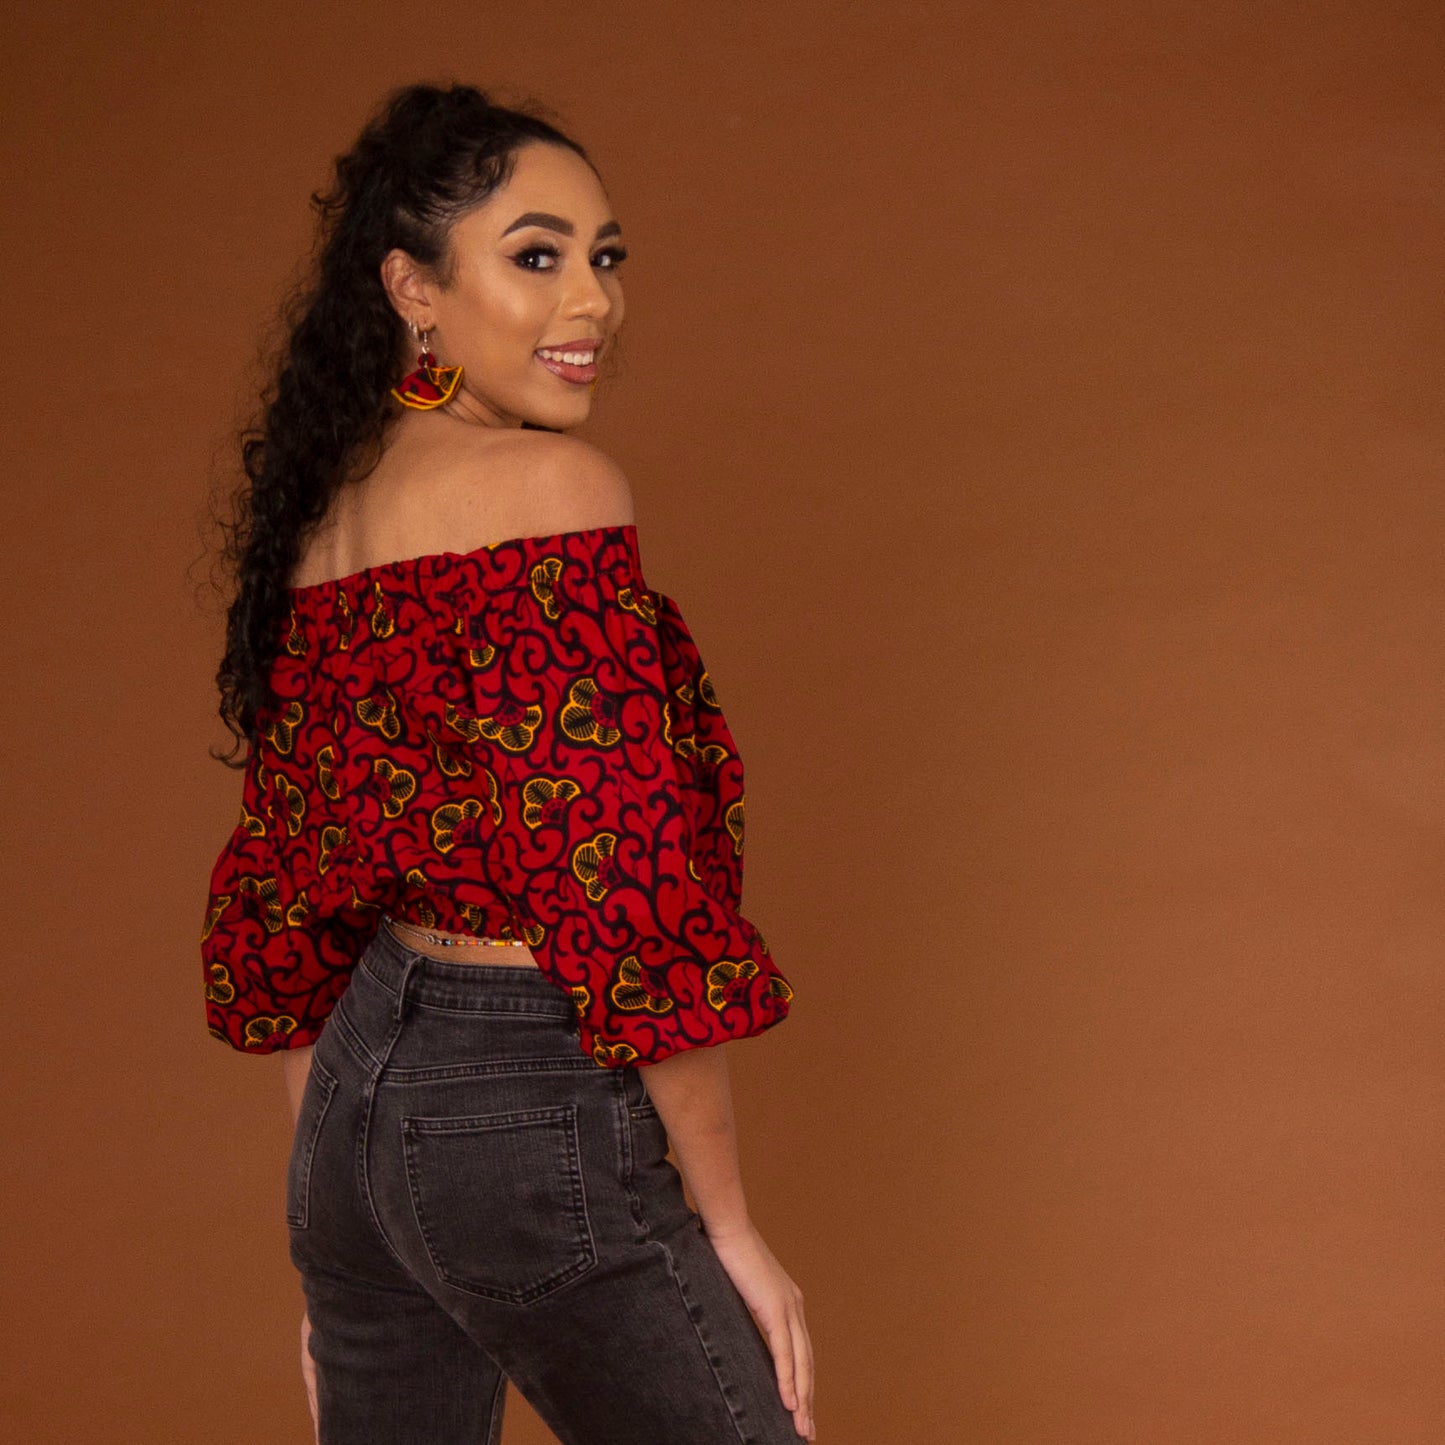 Off-shoulder African print crop top with three-quarter balloon sleeves and elasticated waist, arms and neckline in red and yellow ankara wax print